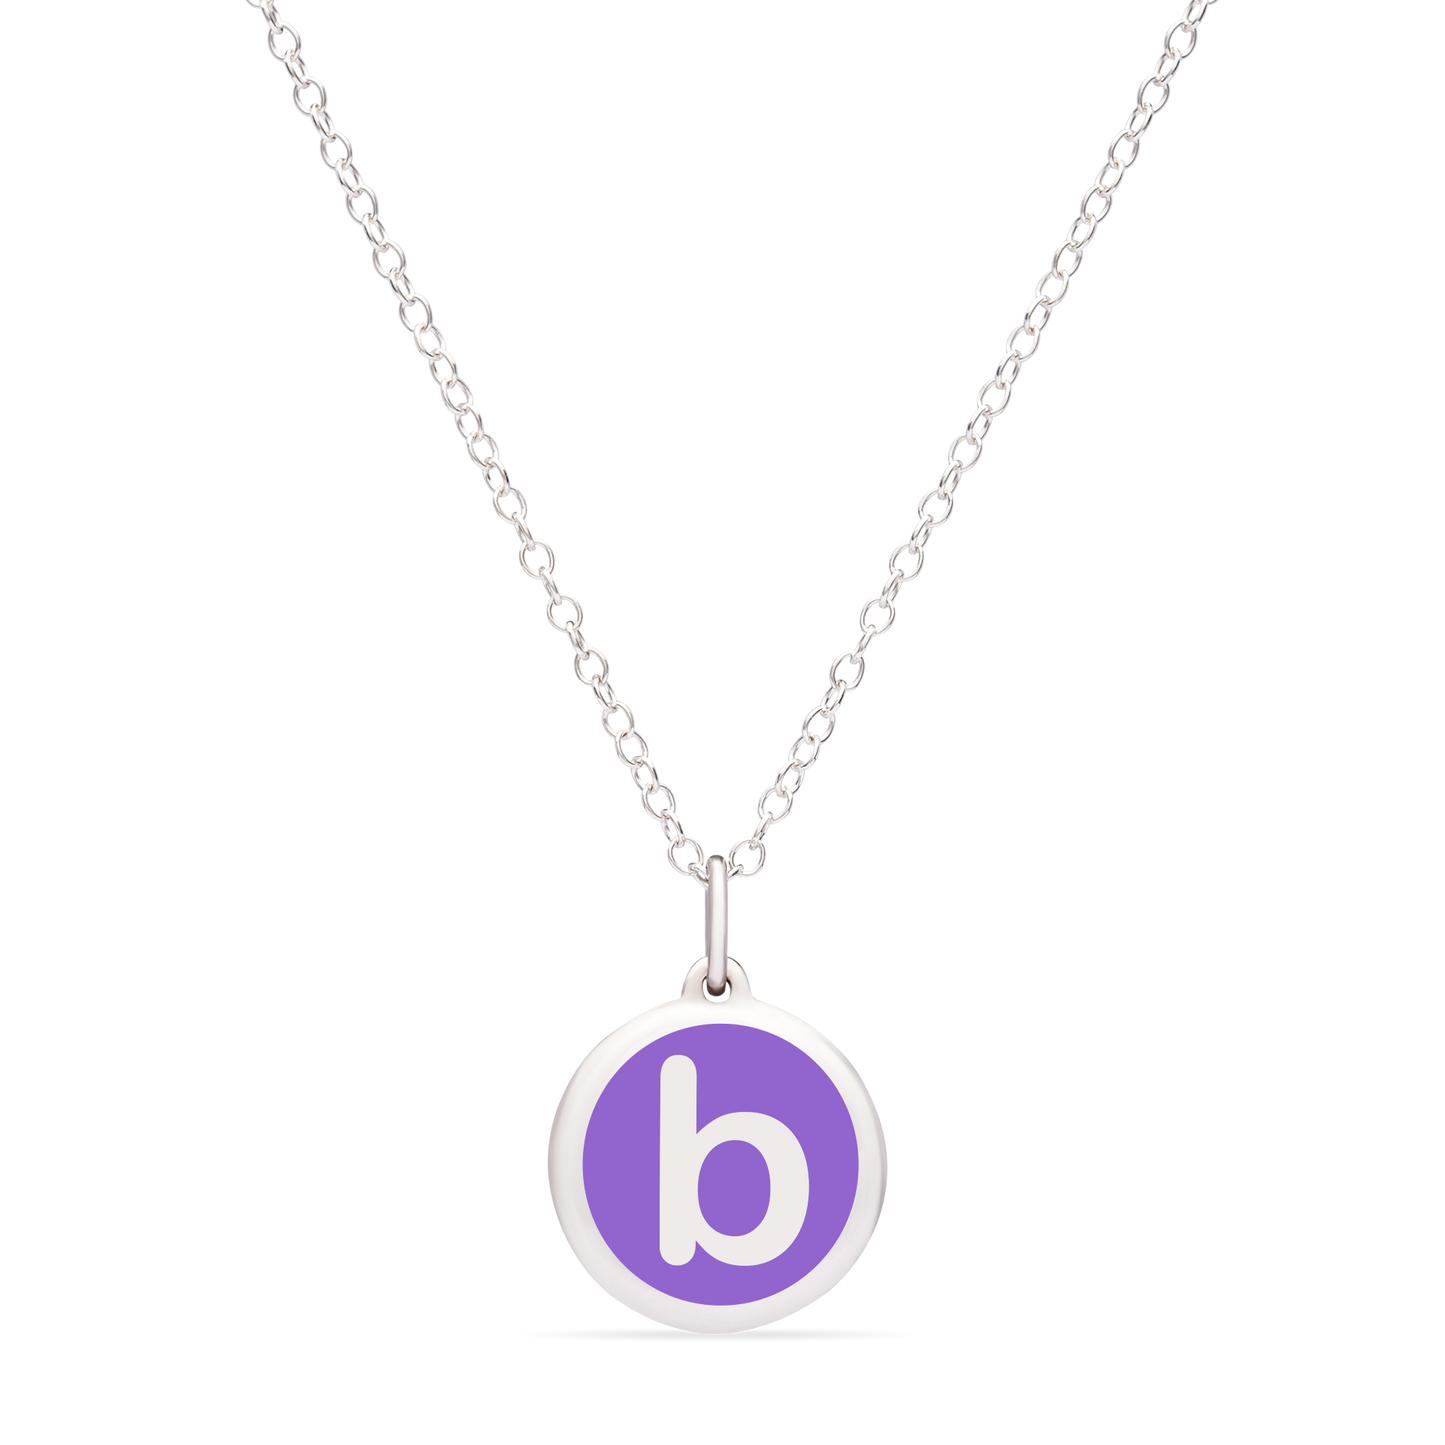 MINI INITIAL 'b' CHARM sterling silver with rhodium plate